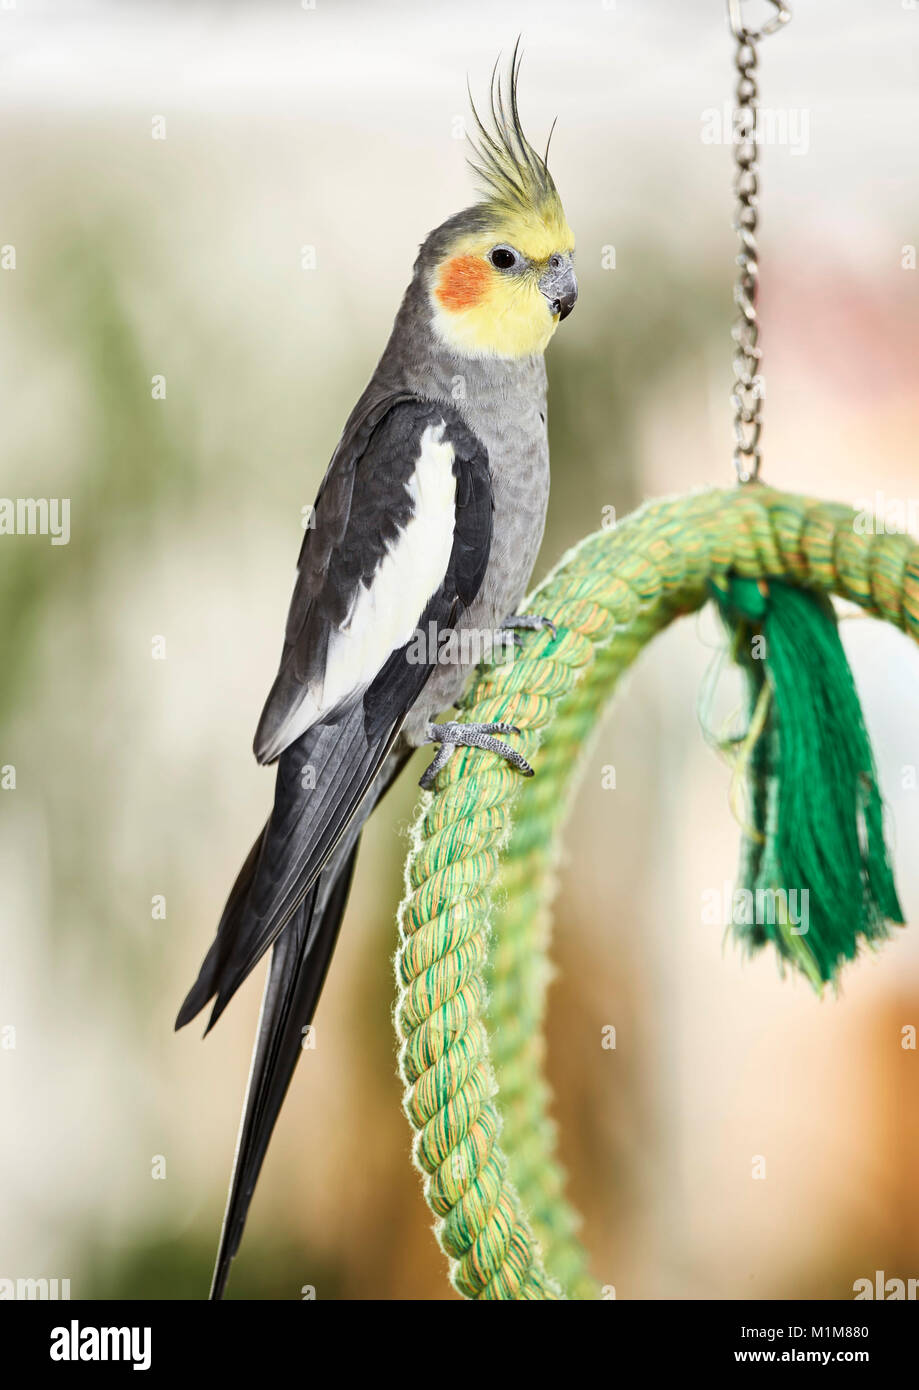 Cockatiel (Nymphicus hollandicus). Adult perched on green cord. Germany Stock Photo